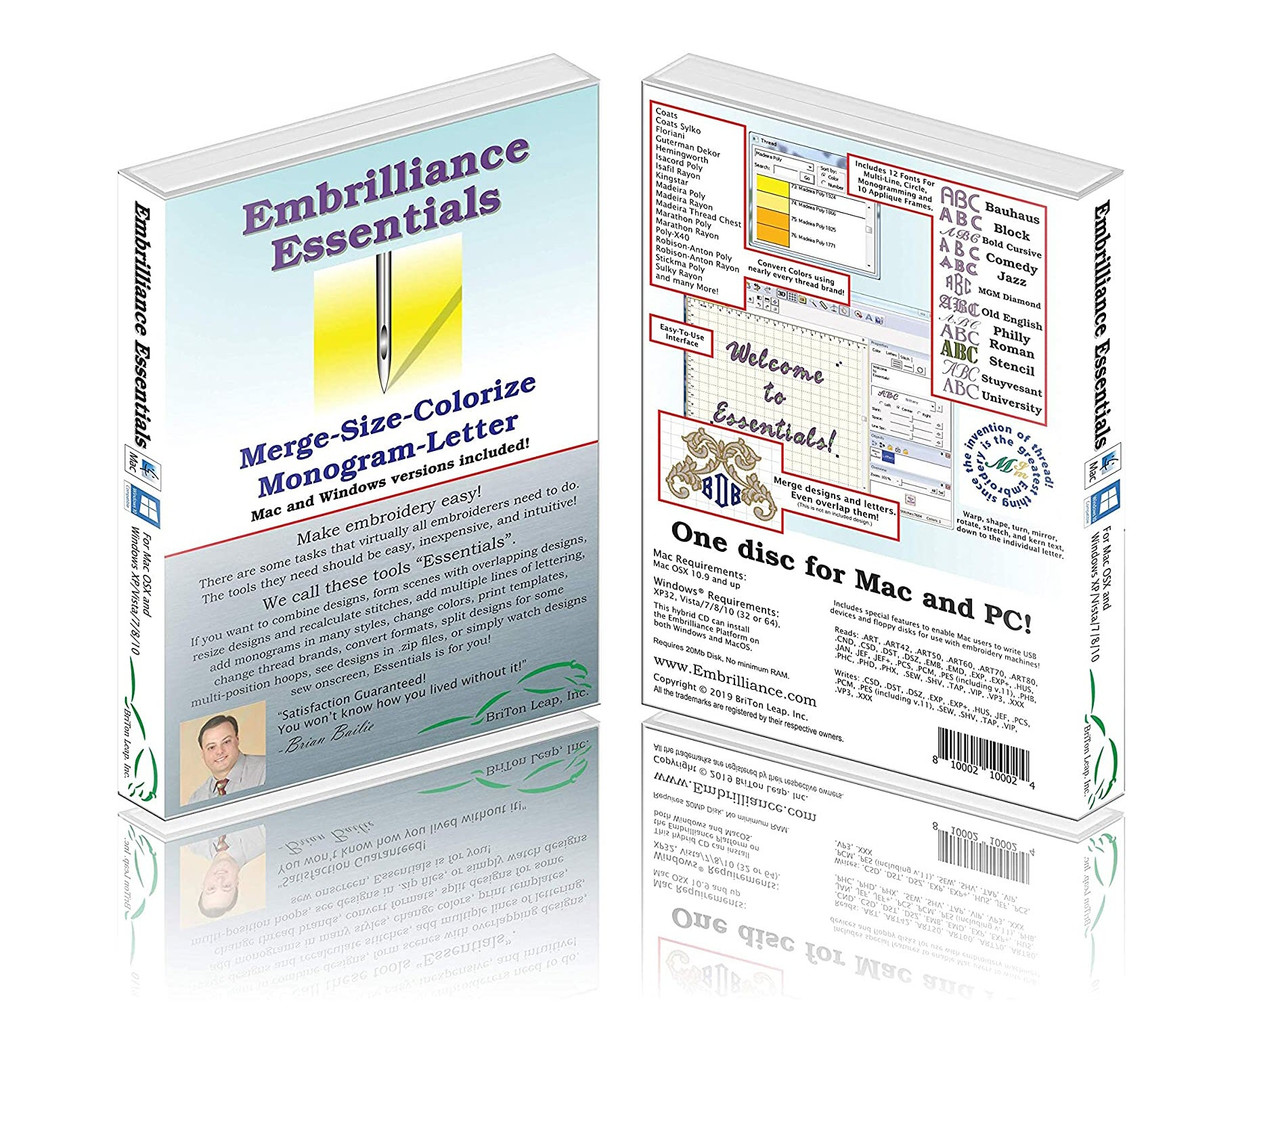 Embrilliance Thumbnailer Embroidery Software for Mac & PC